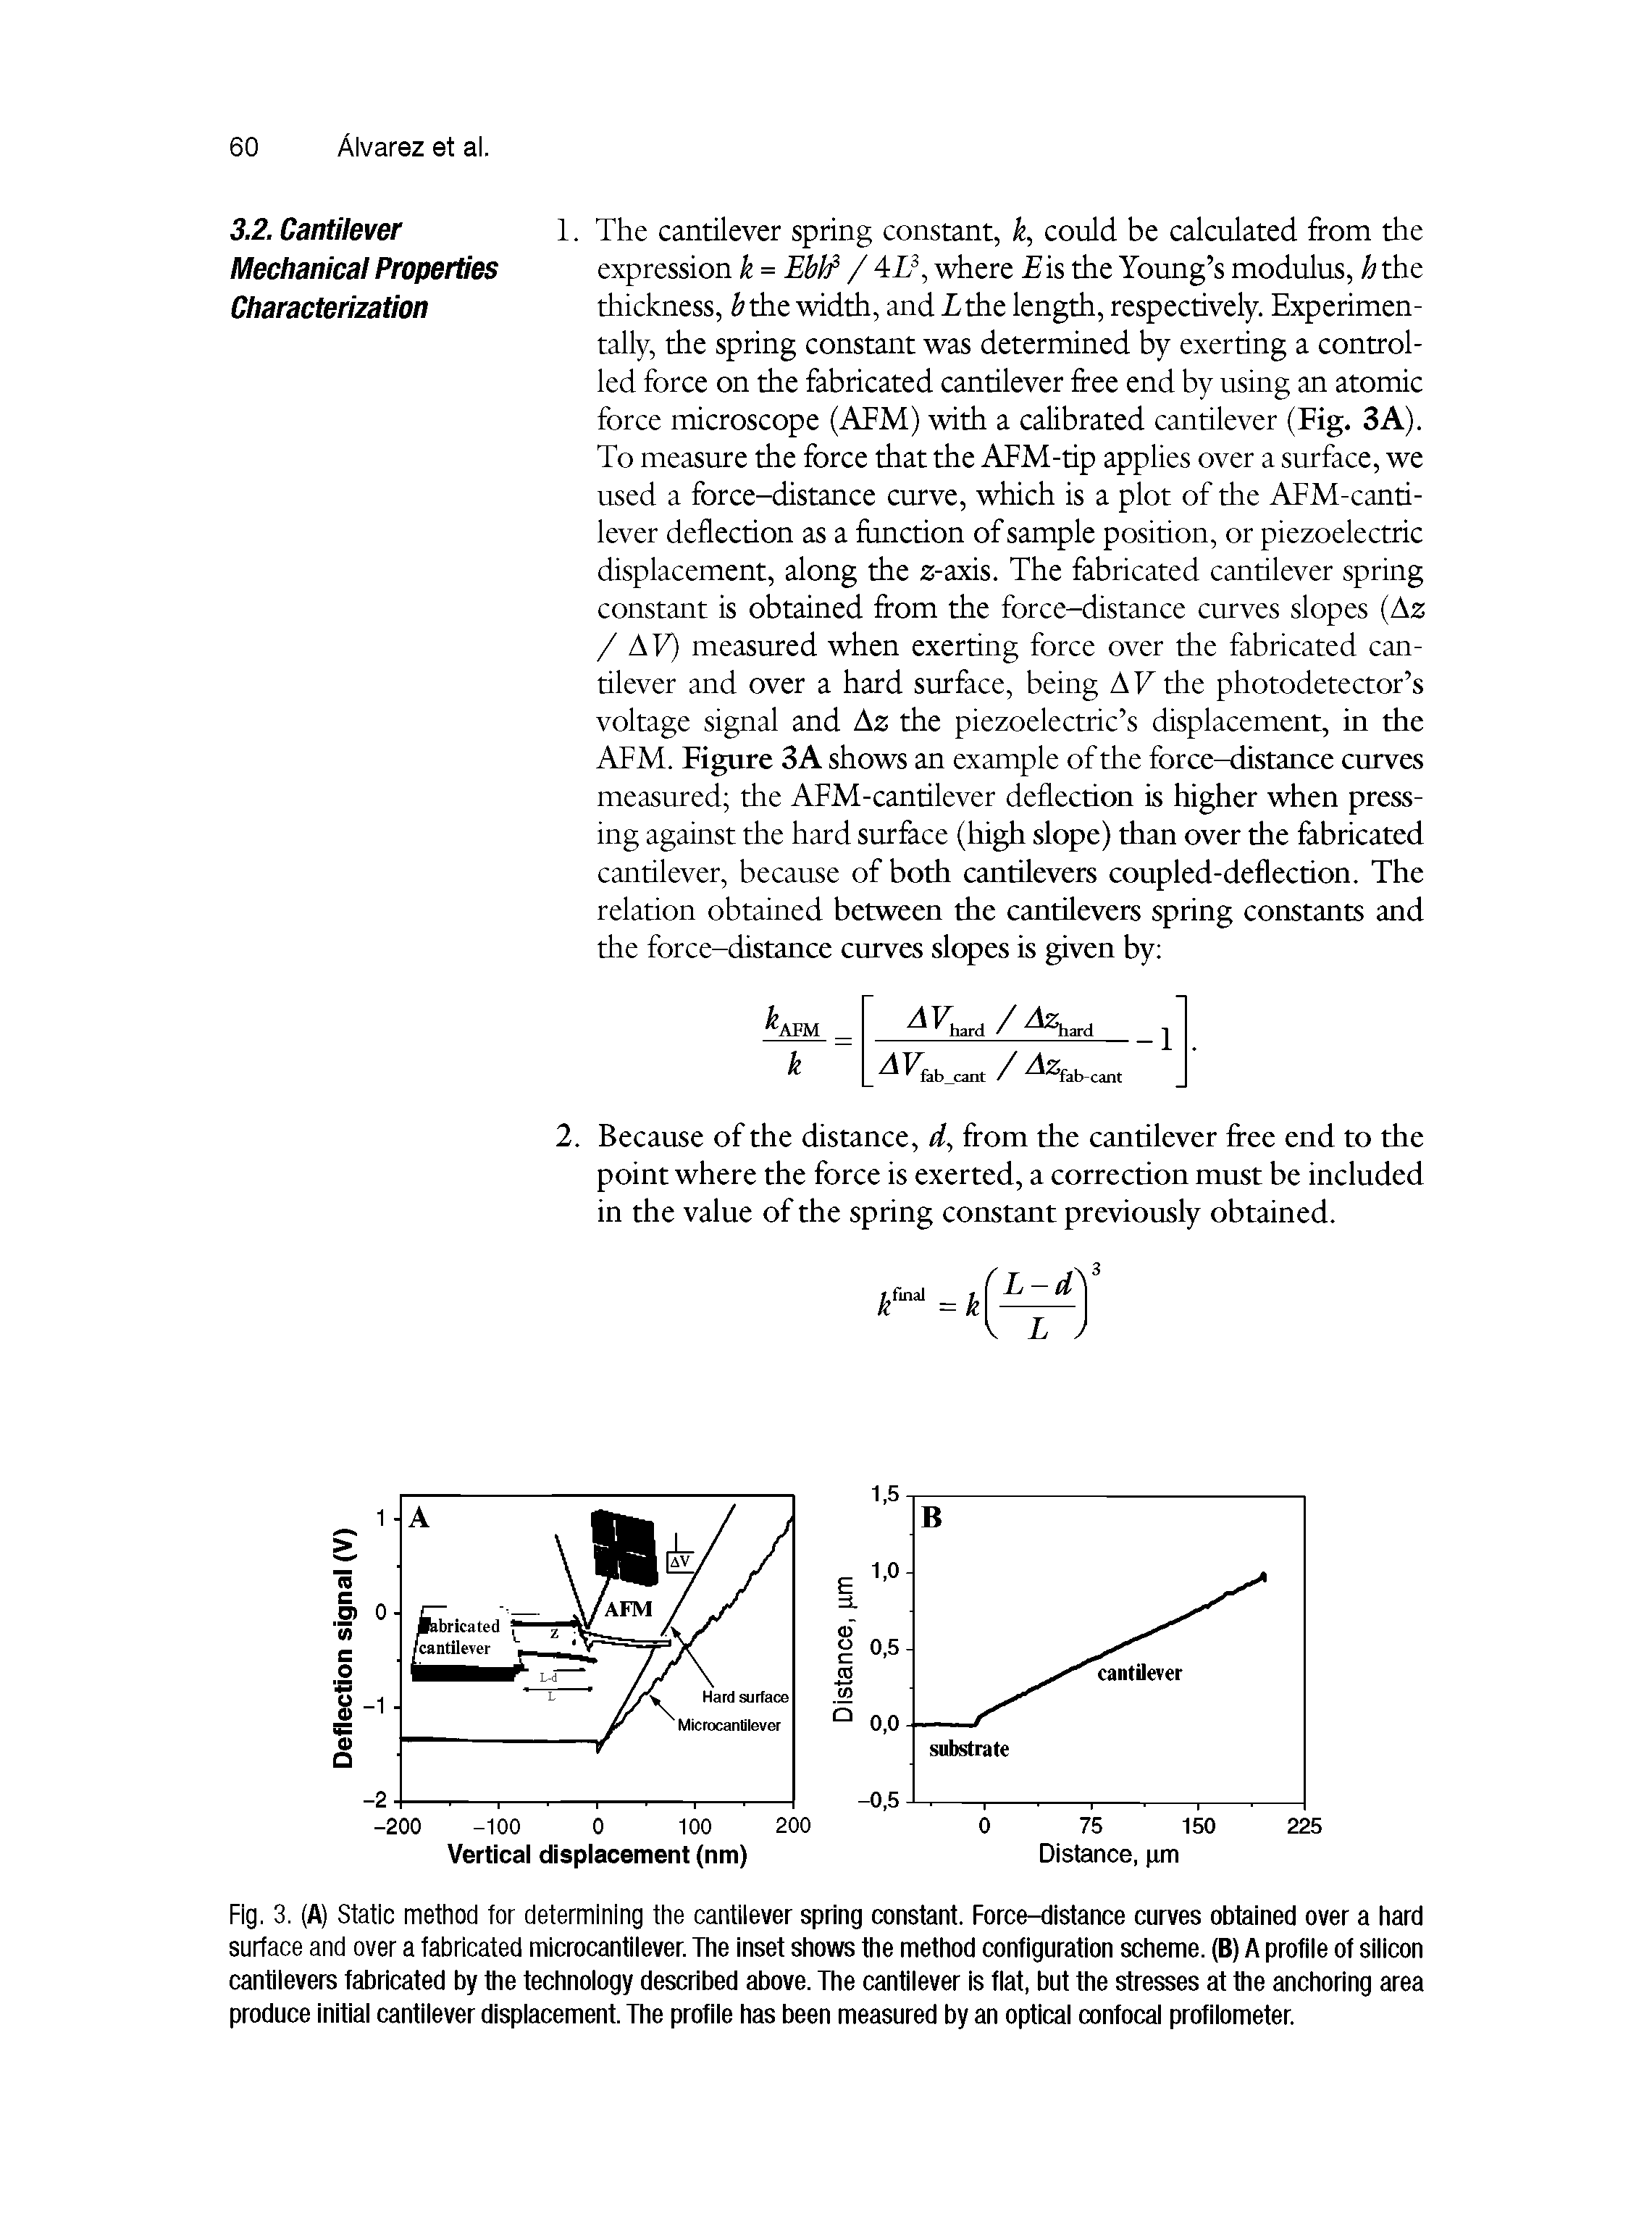 Fig. 3. (A) Static method for determining the cantilever spring constant. Force-distance curves obtained over a hard surface and over a fabricated microcantilever. The inset shows the method configuration scheme. (B) A profile of silicon cantilevers fabricated by the technology described above. The cantilever is flat, but the stresses at the anchoring area produce initial cantilever displacement. The profile has been measured by an optical confocal profilometer.